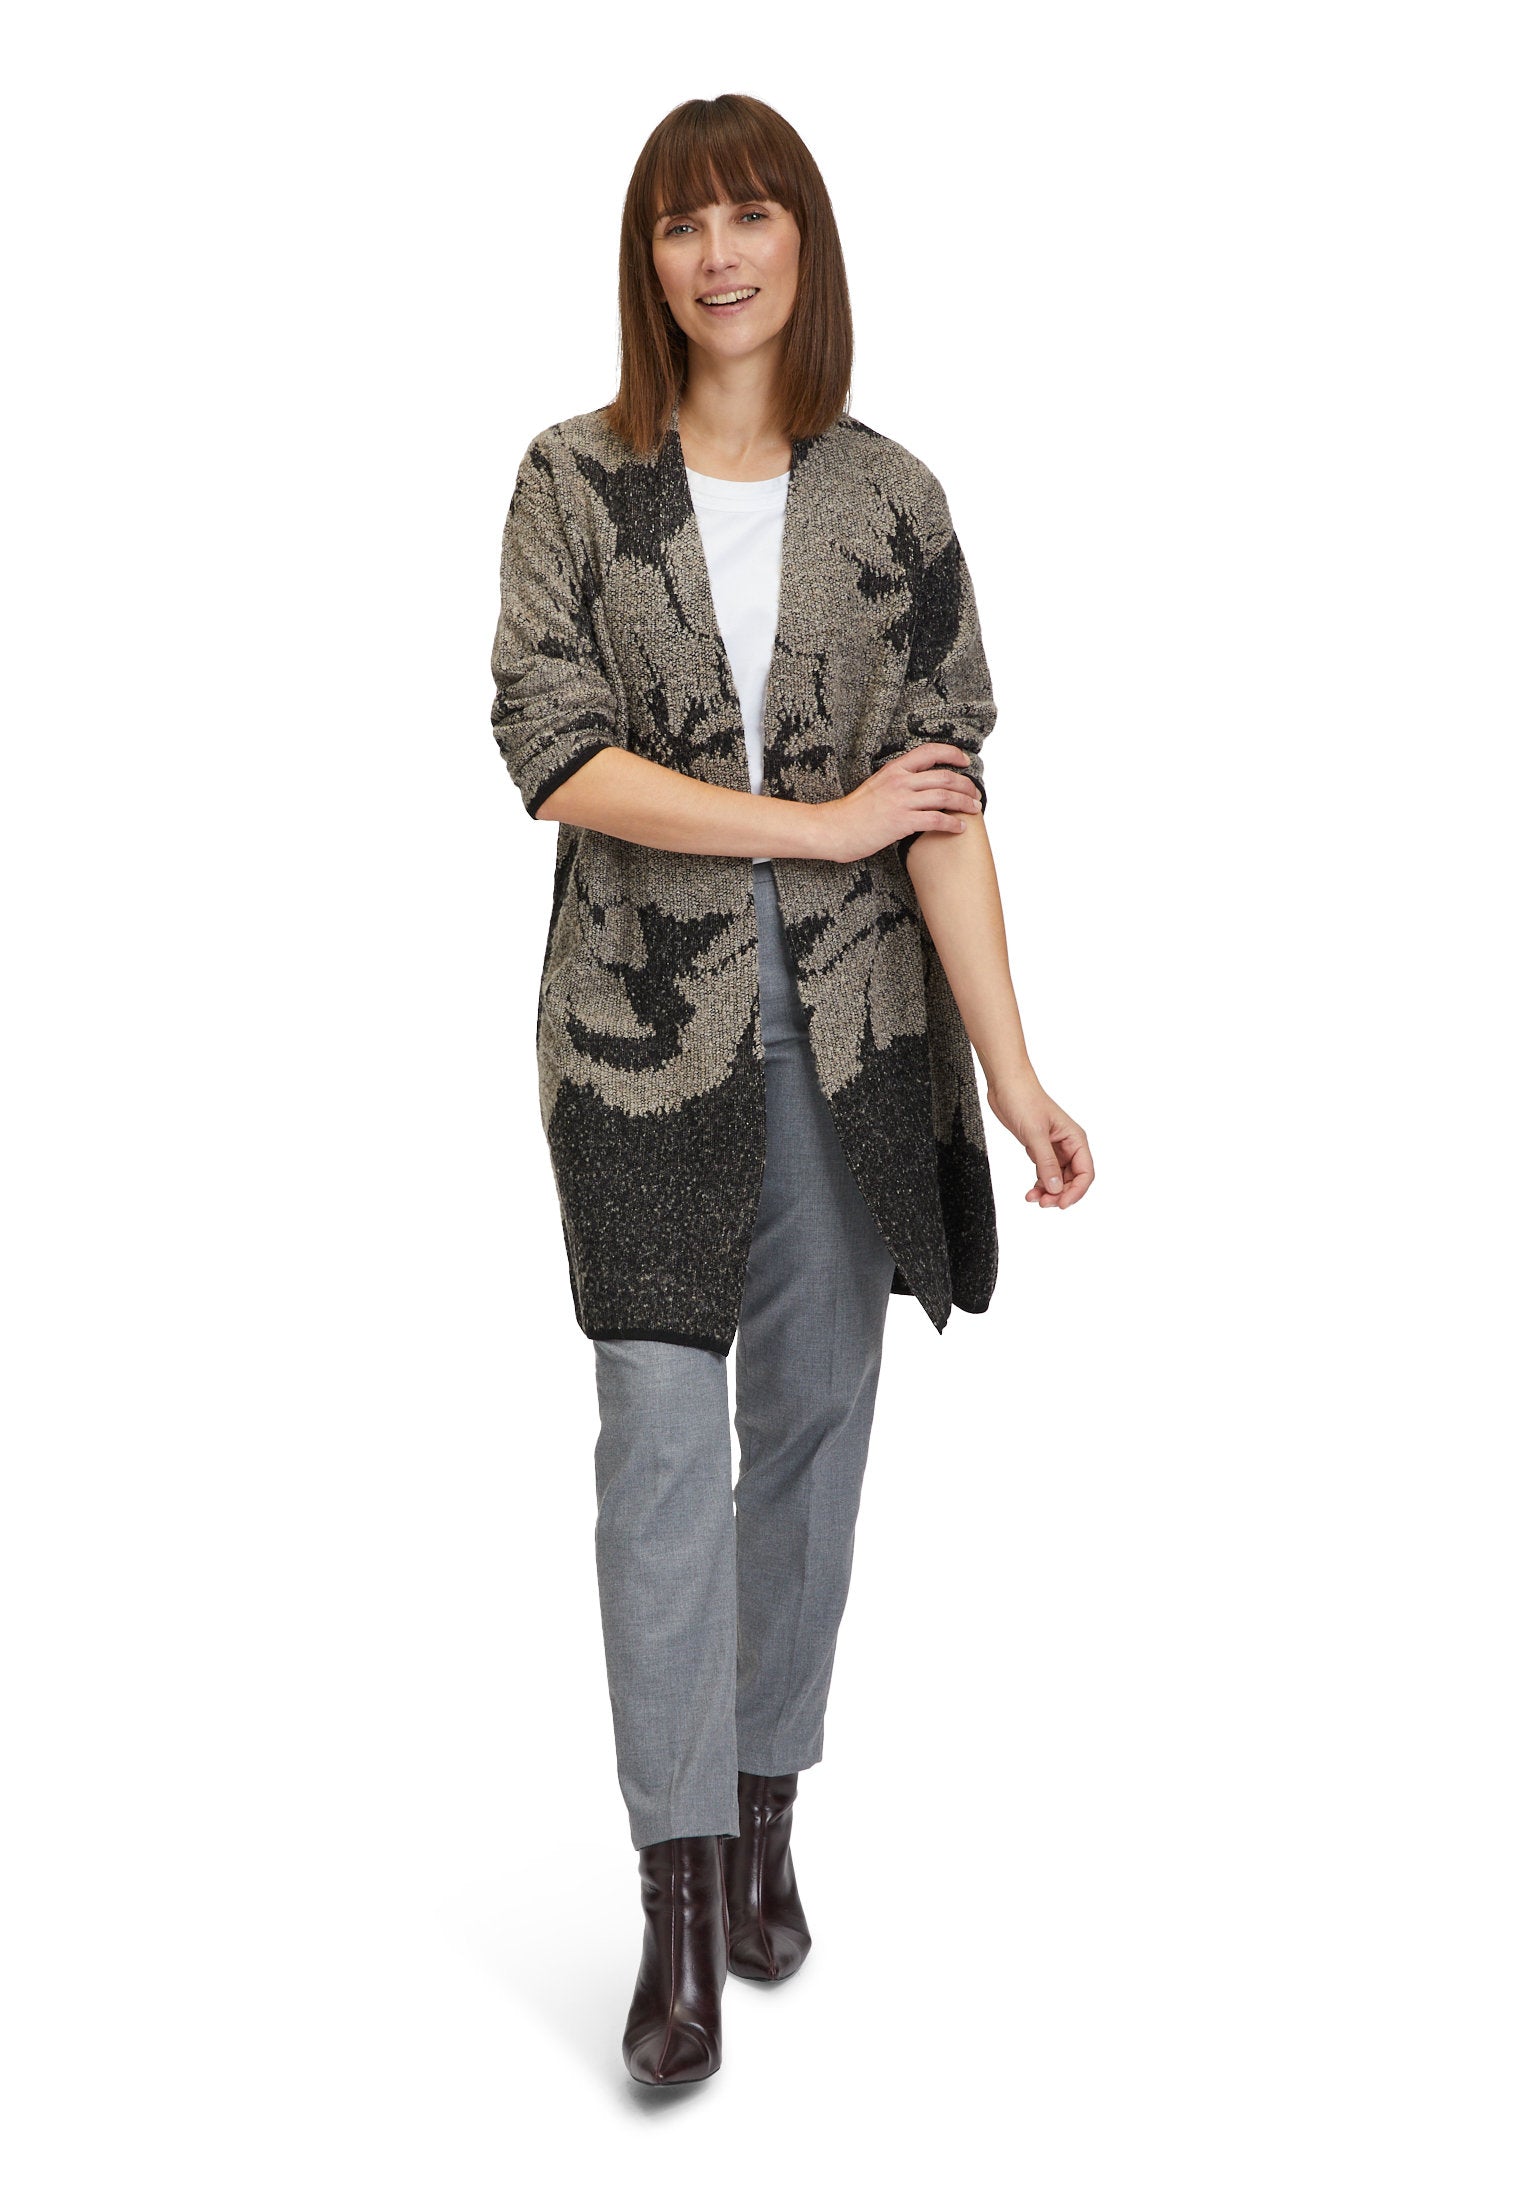 Long Cardigan With Floral Motif_5993-2223_9978_05